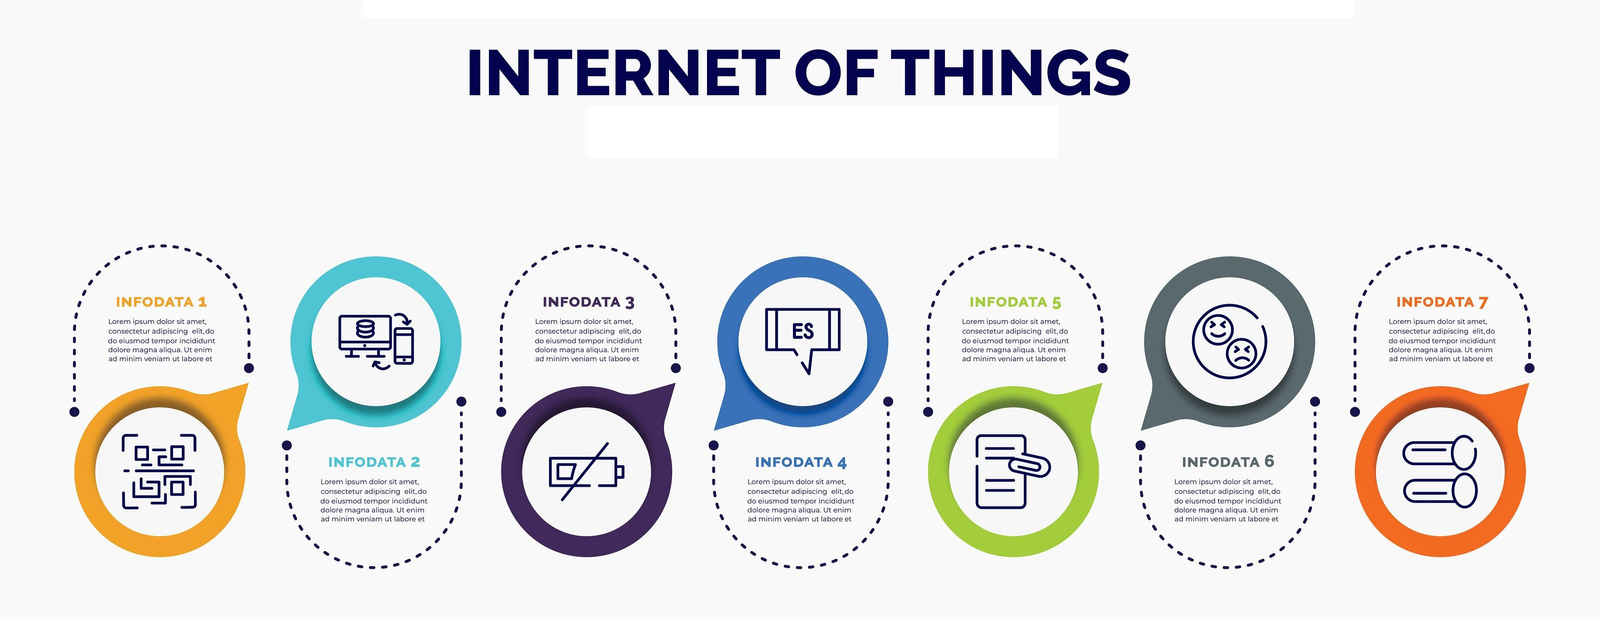 The concept of IoT